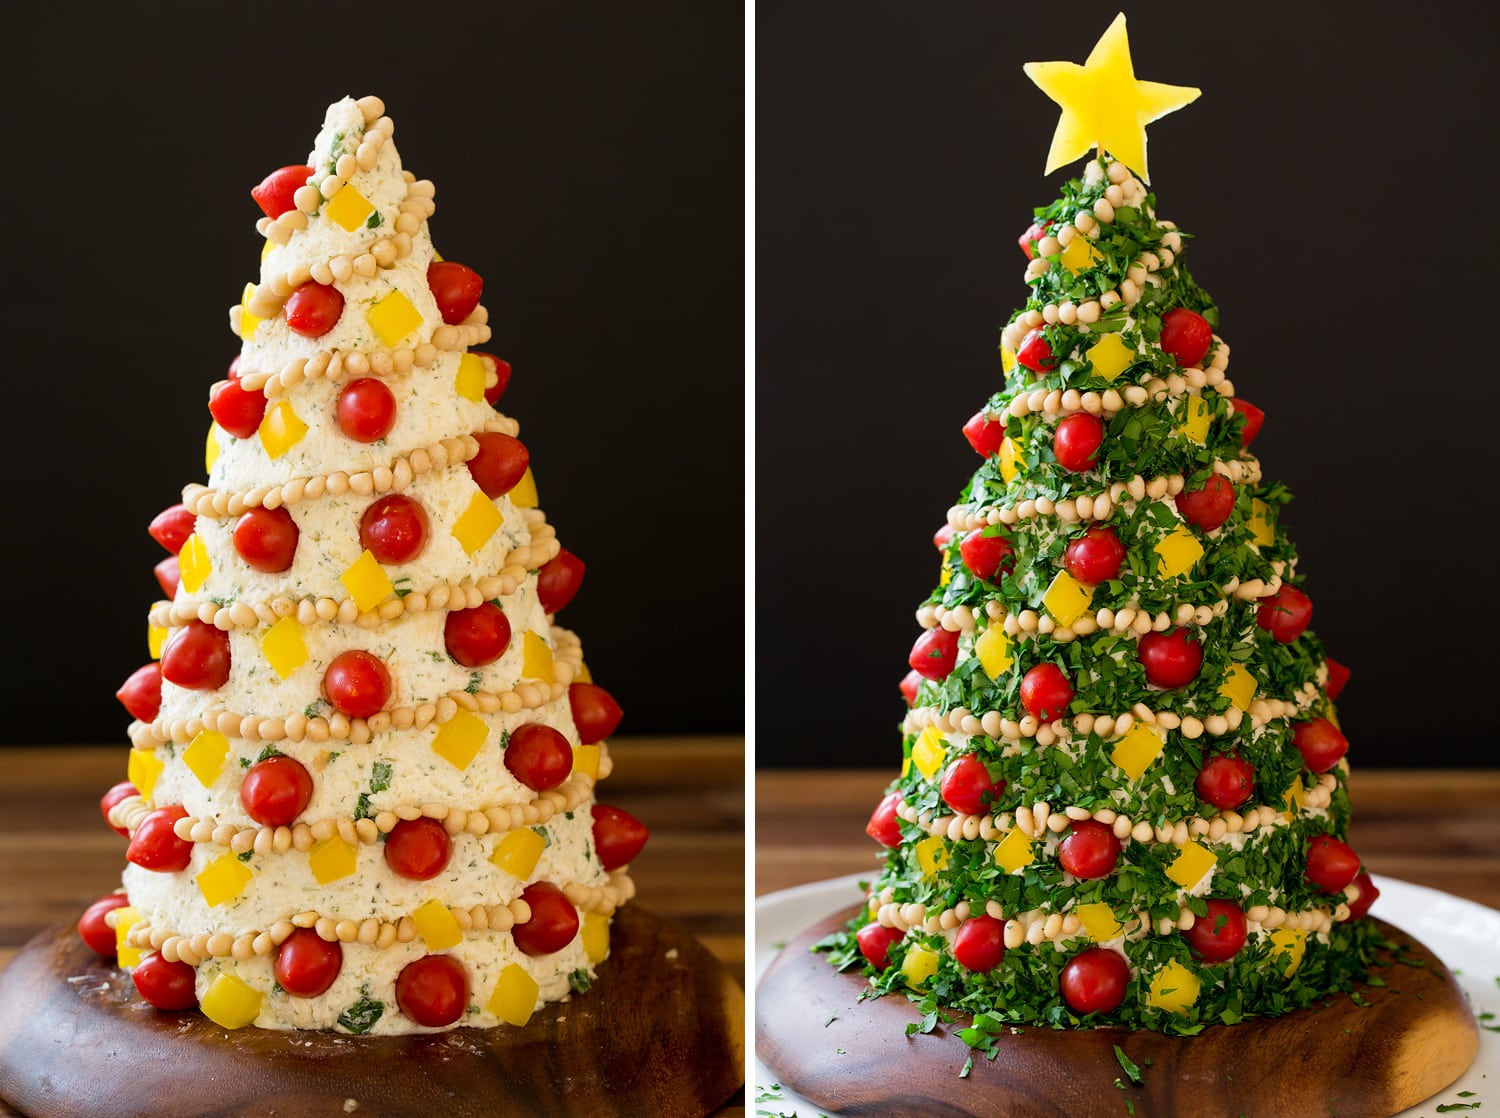 Decorating a cheeseball with herbs, tomatoes and pine nuts for a Christmas tree finish.